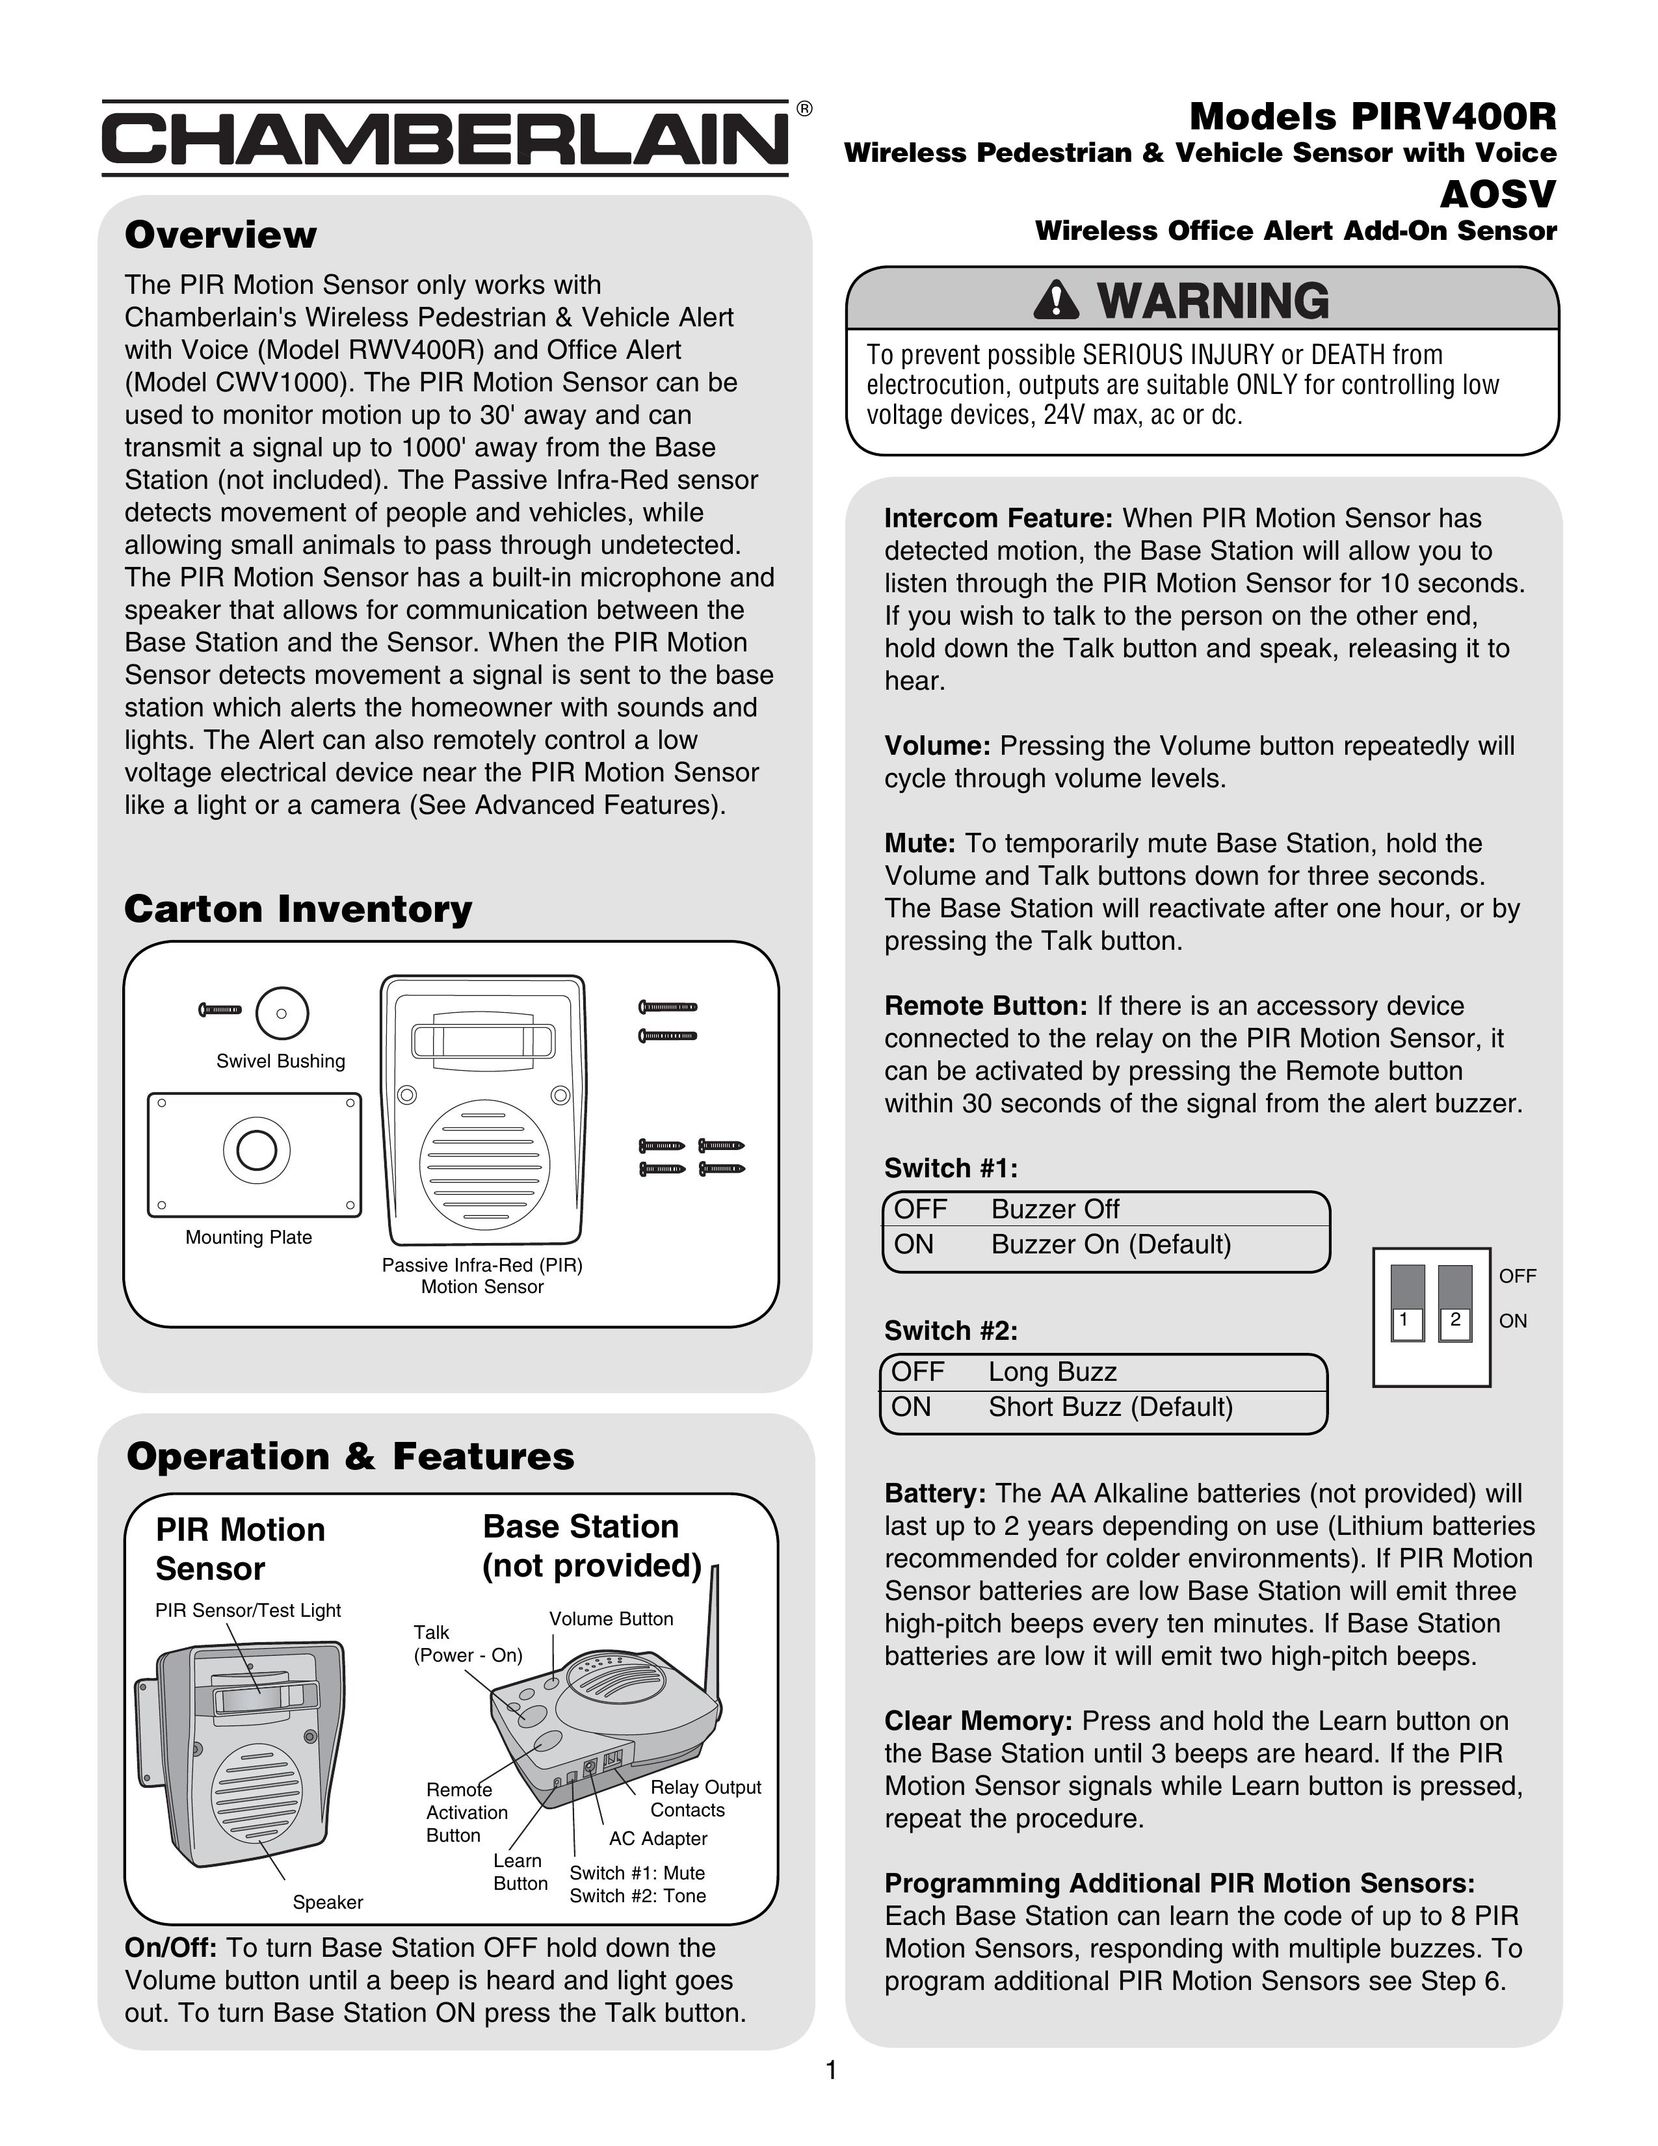 Chamberlain PIRV400R Home Security System User Manual